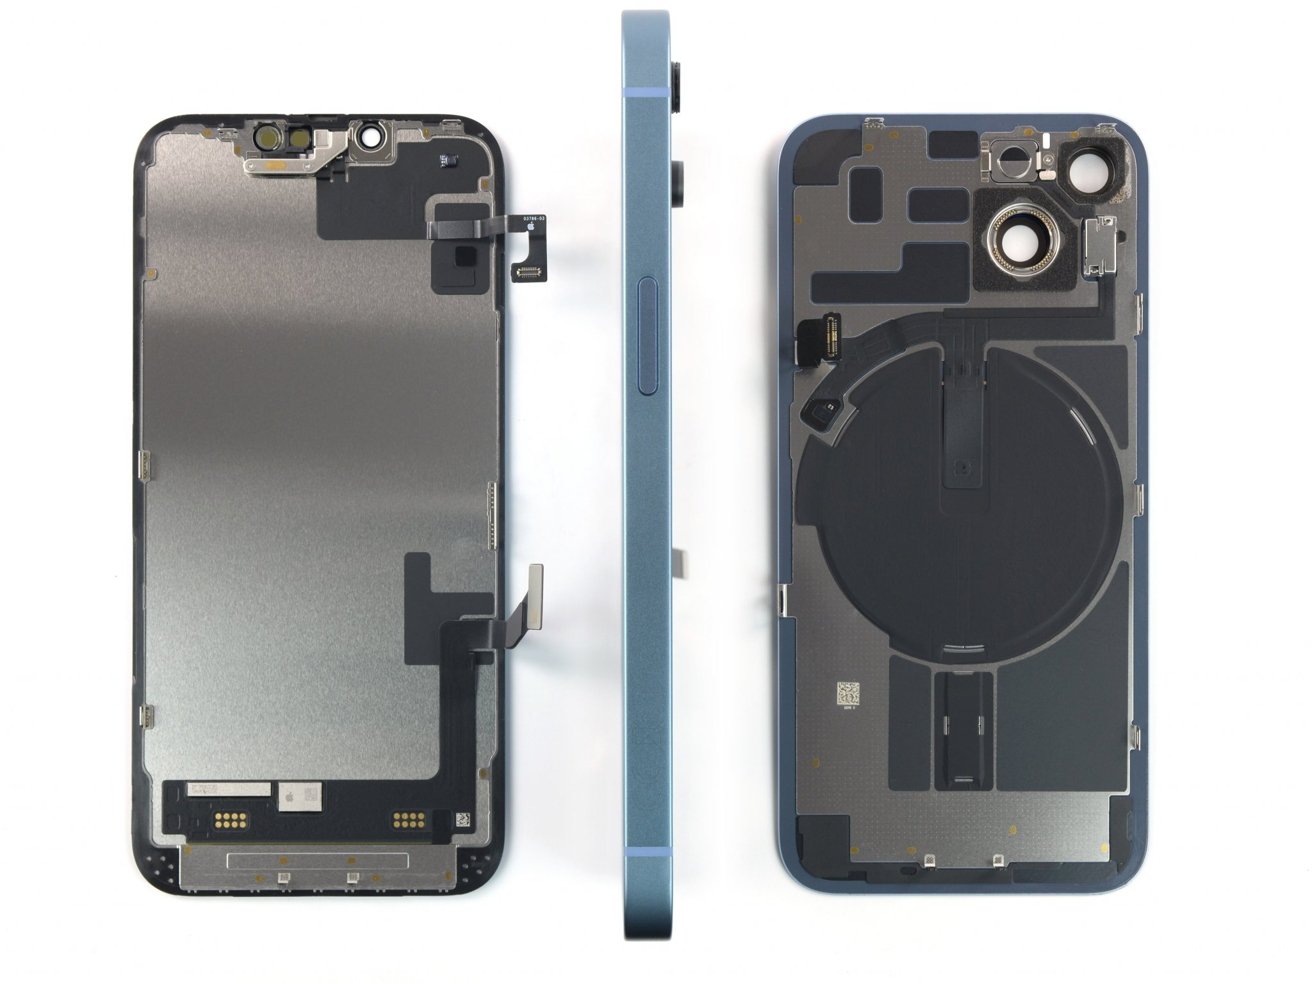 The butterfly view of the iPhone 14, disassembled [via iFixit]